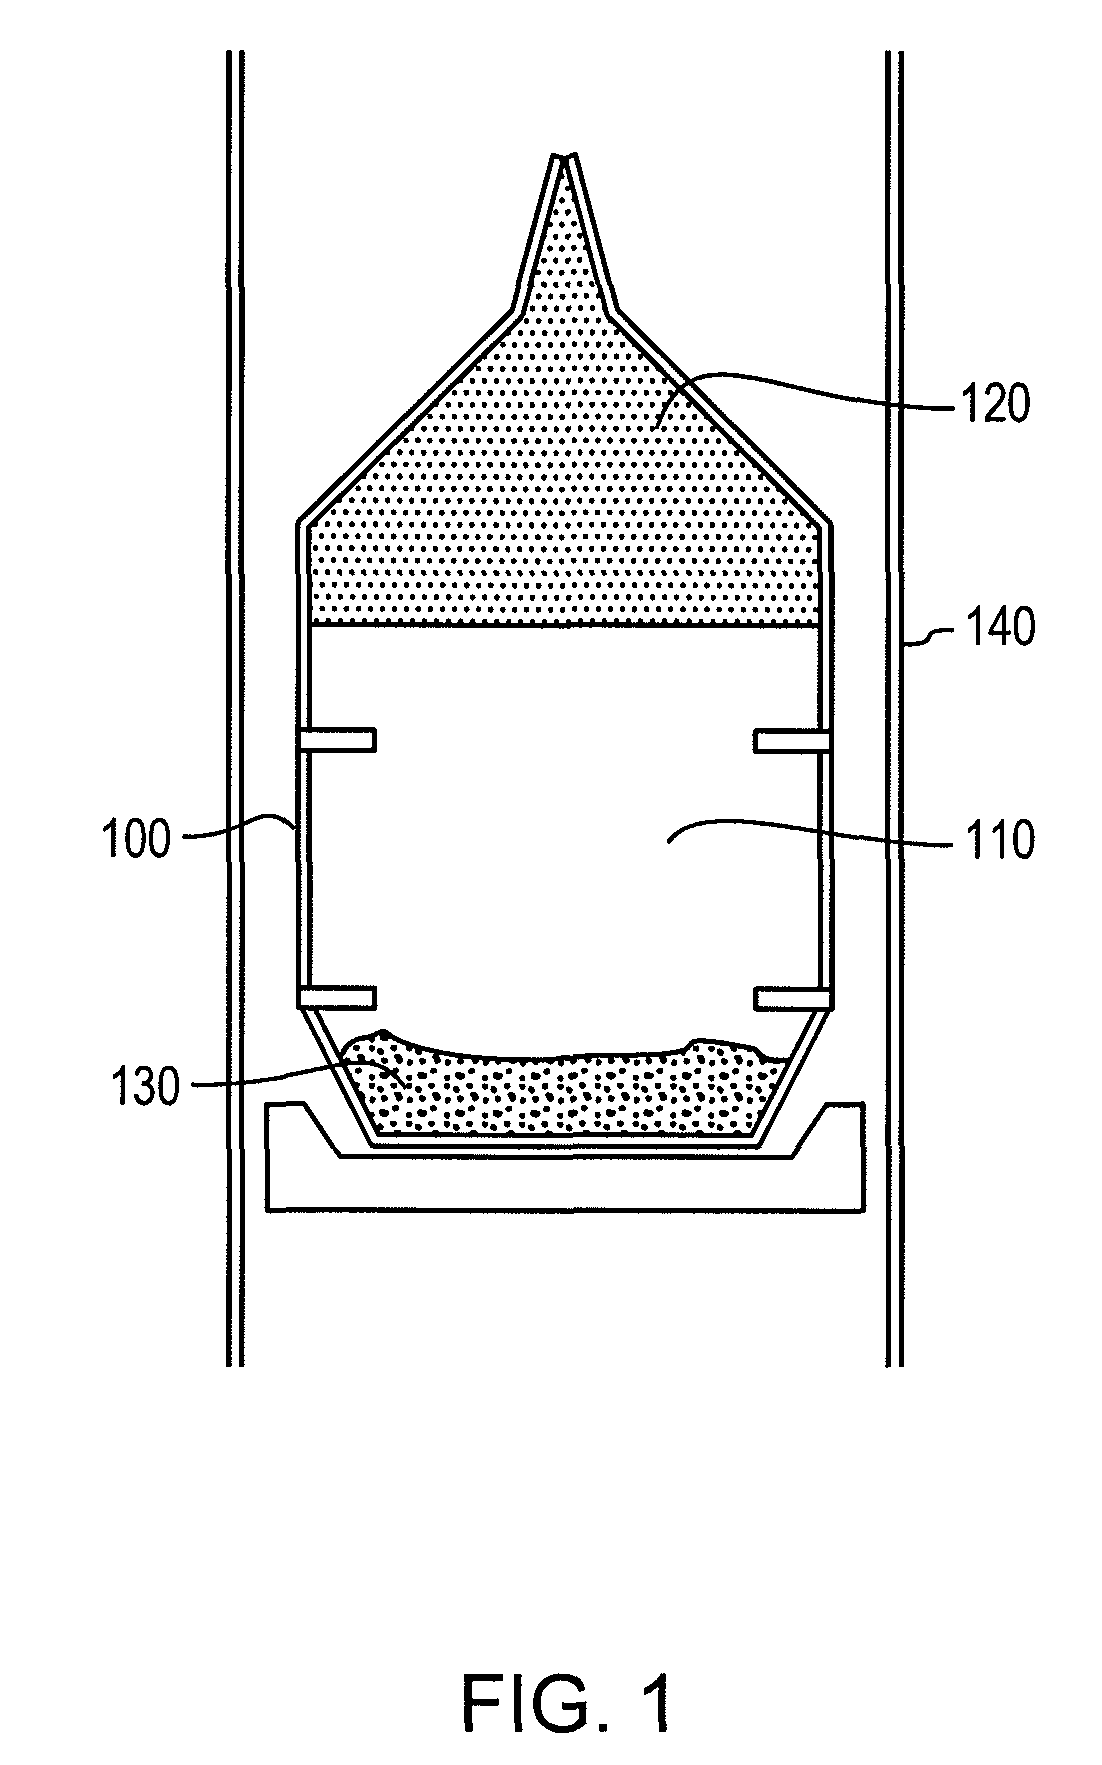 Methods for controllable doping of aluminum nitride bulk crystals